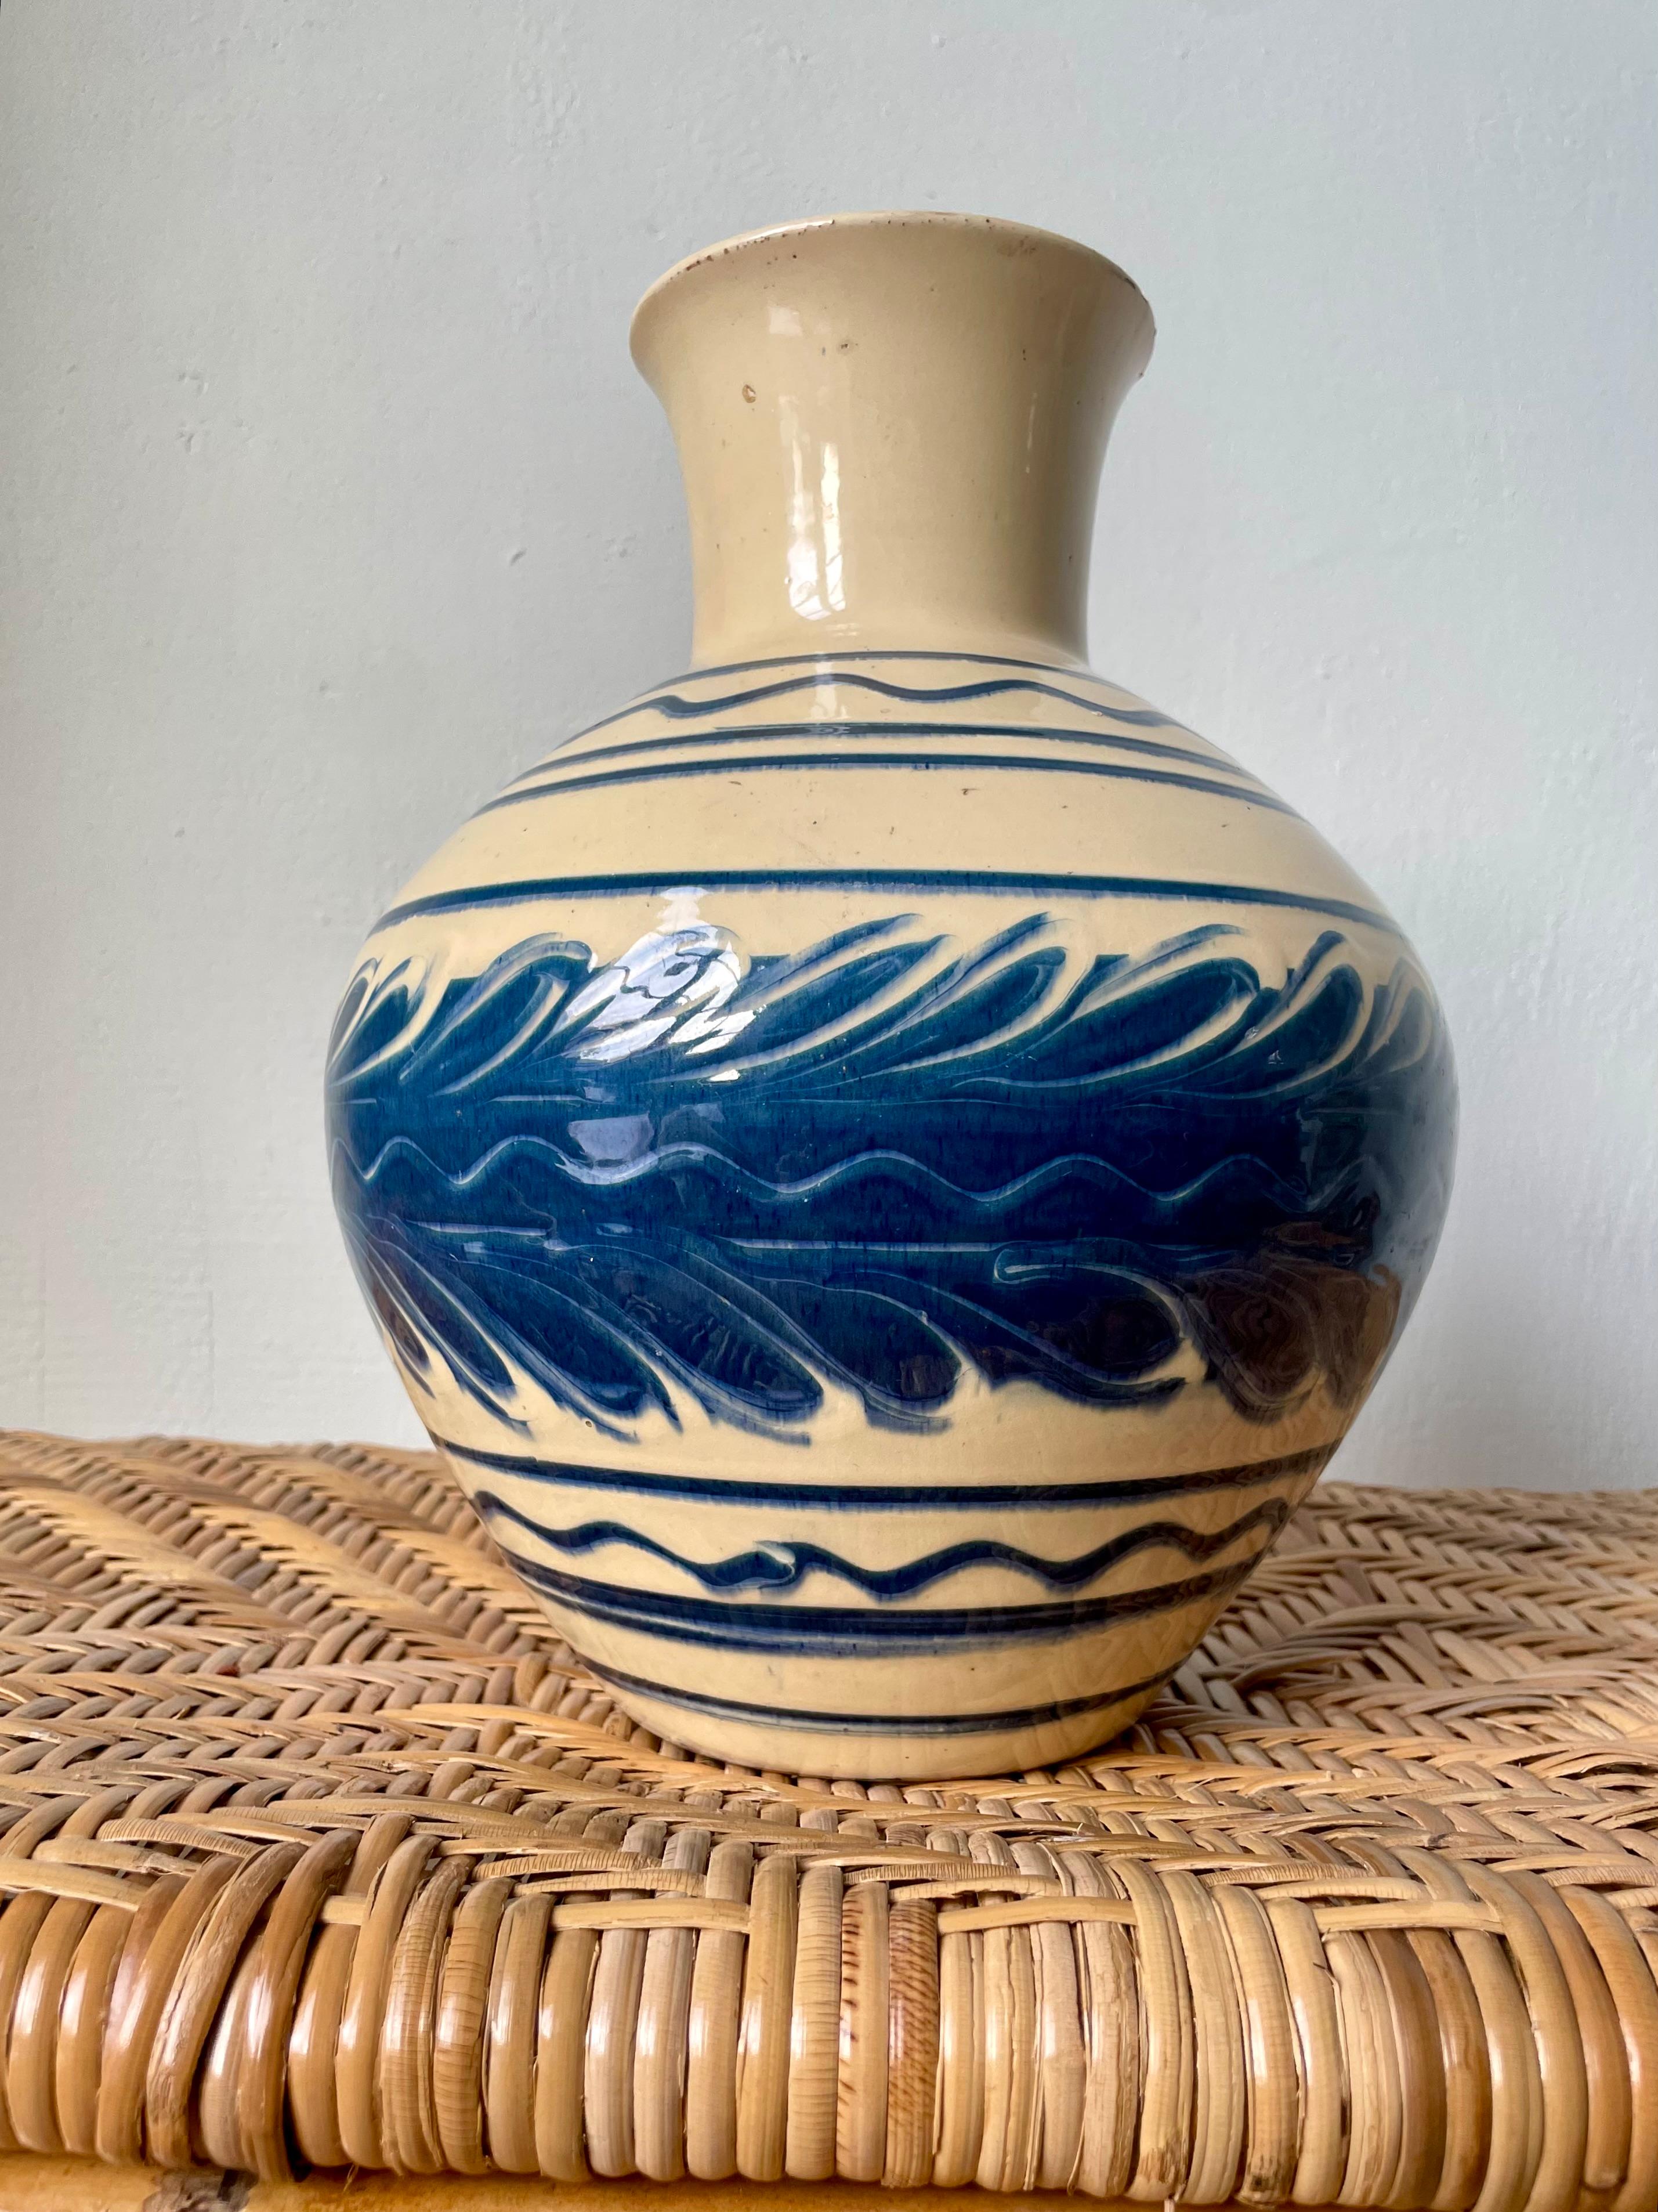 Handmade Danish 1940s ceramic vase by Herman Kähler Keramik. Cream glaze with hand-painted lined and organically wavy decorations in clear blue. Signed and stamped under base. Rustic vintage condition consistent with age and wear. 
Denmark, 1940s. 